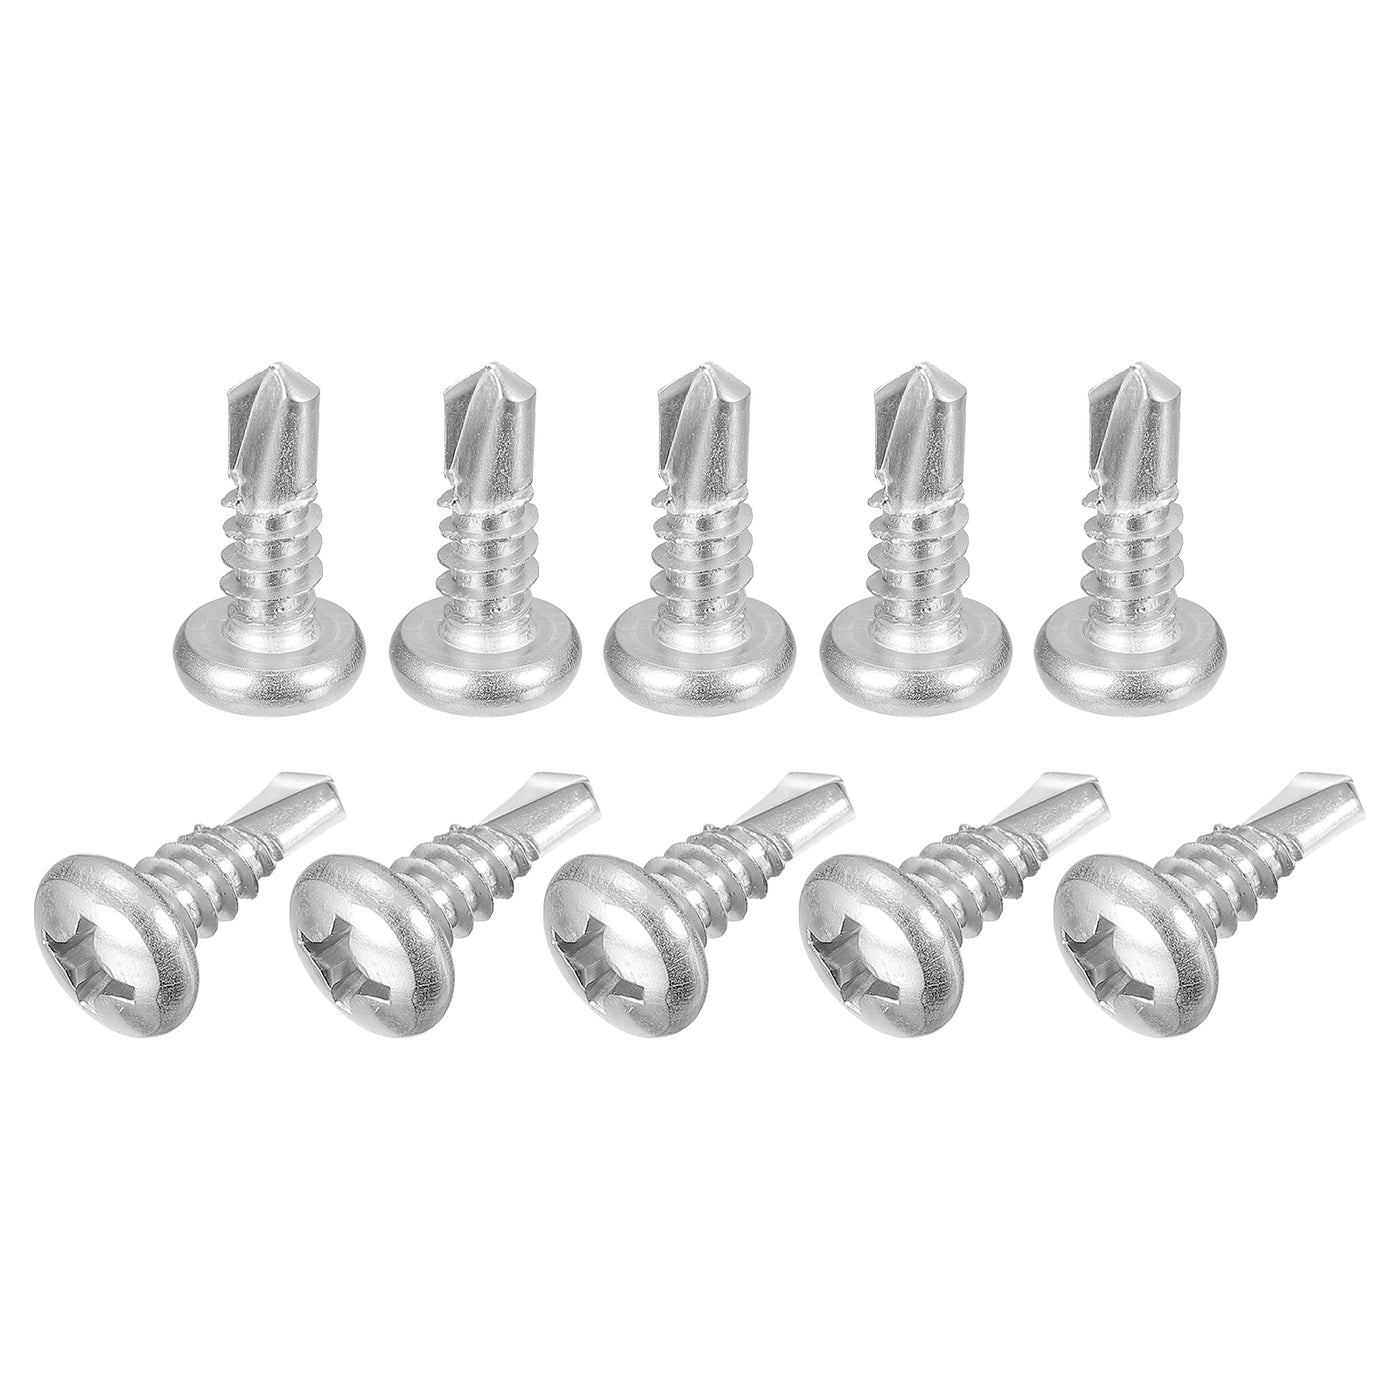 uxcell Uxcell #14 x 3/4" Self Drilling Screws, 50pcs Phillips Pan Head Self Tapping Screws